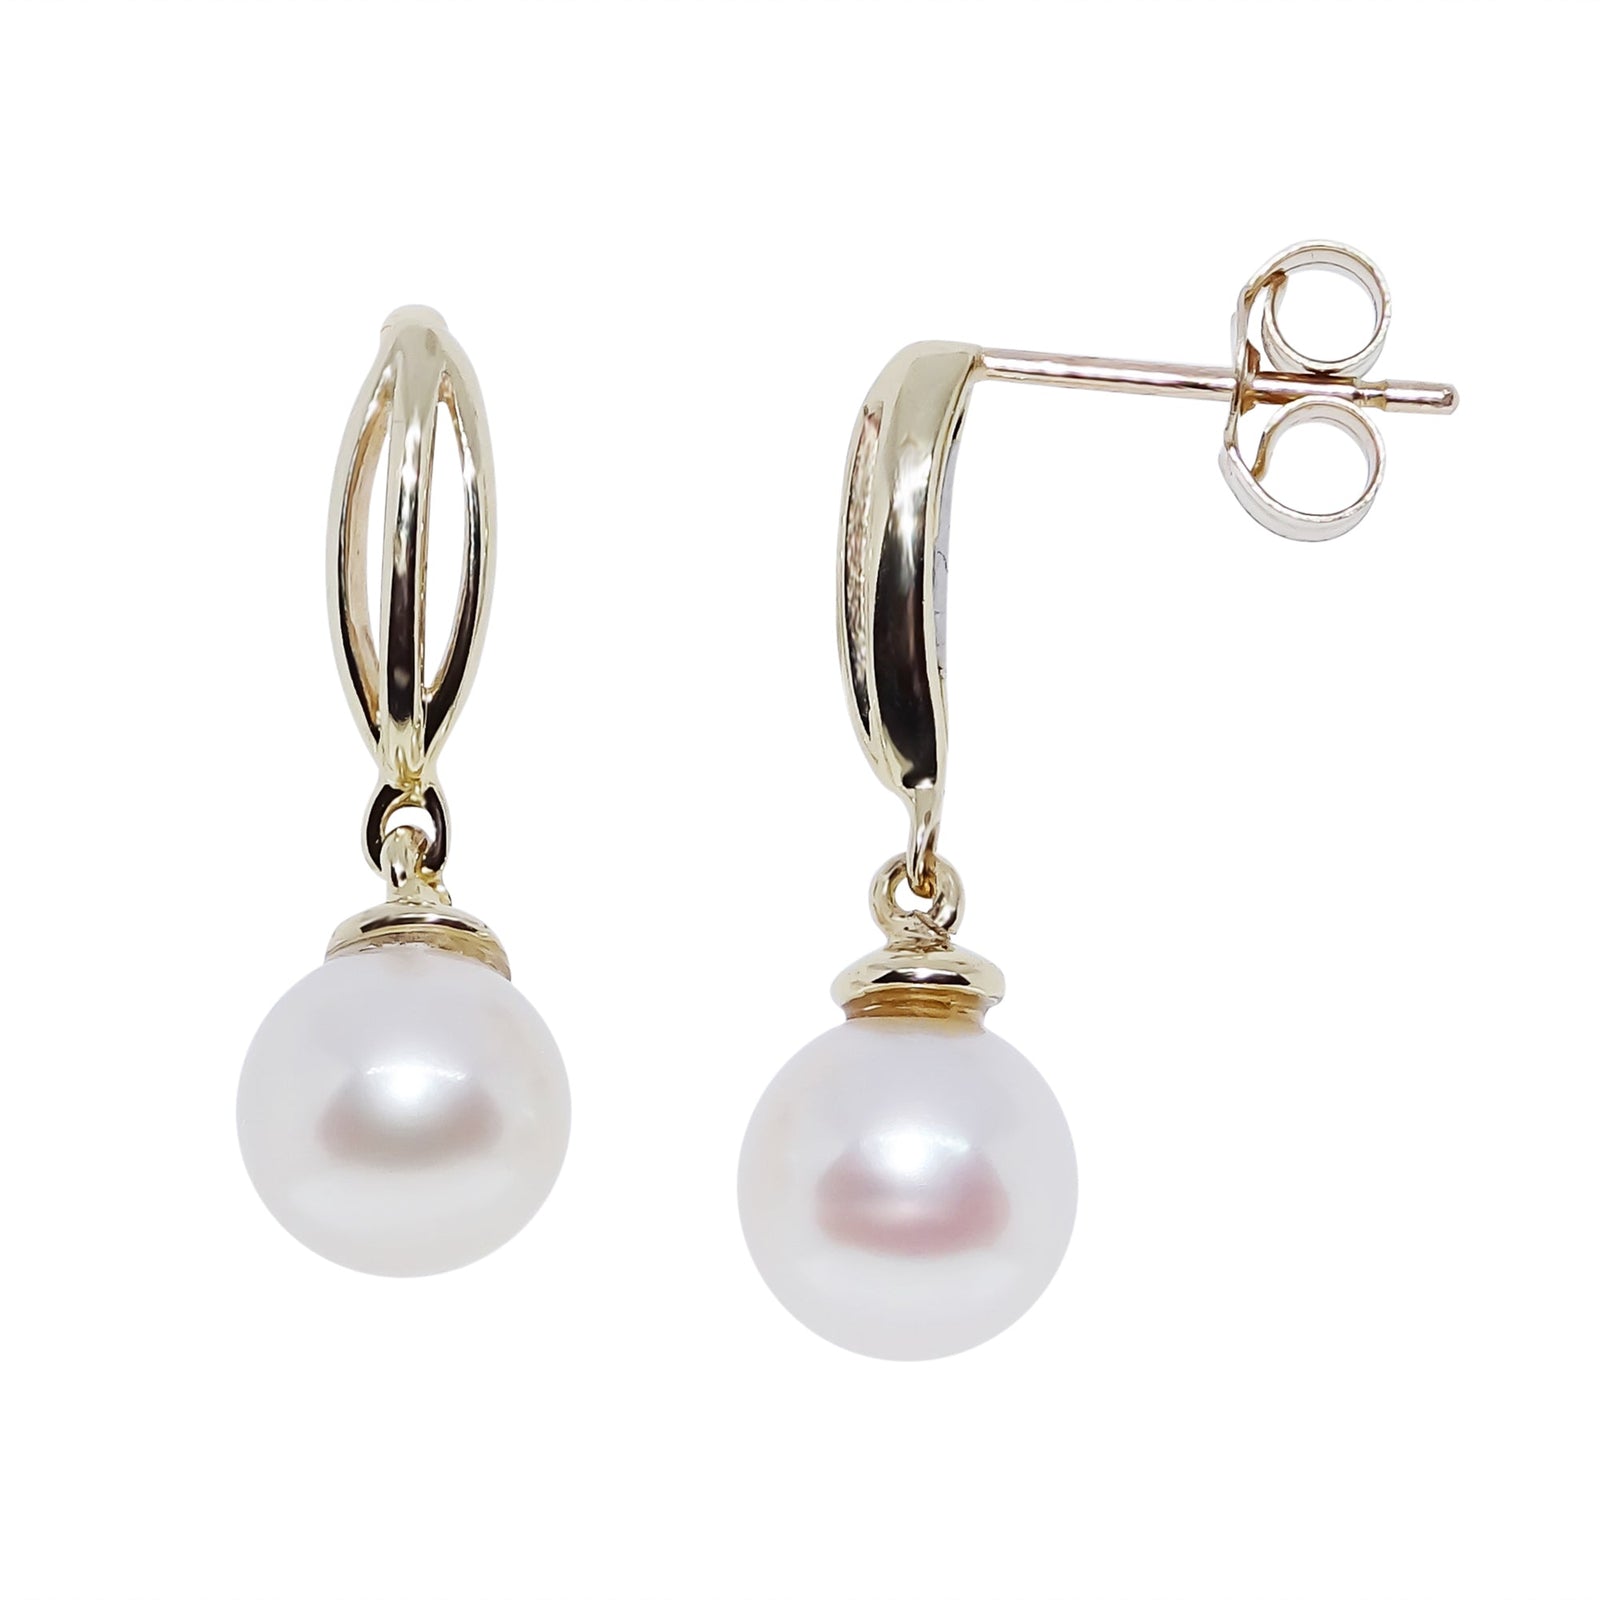 9ct gold 7.5mm cultured pearl drop earrings